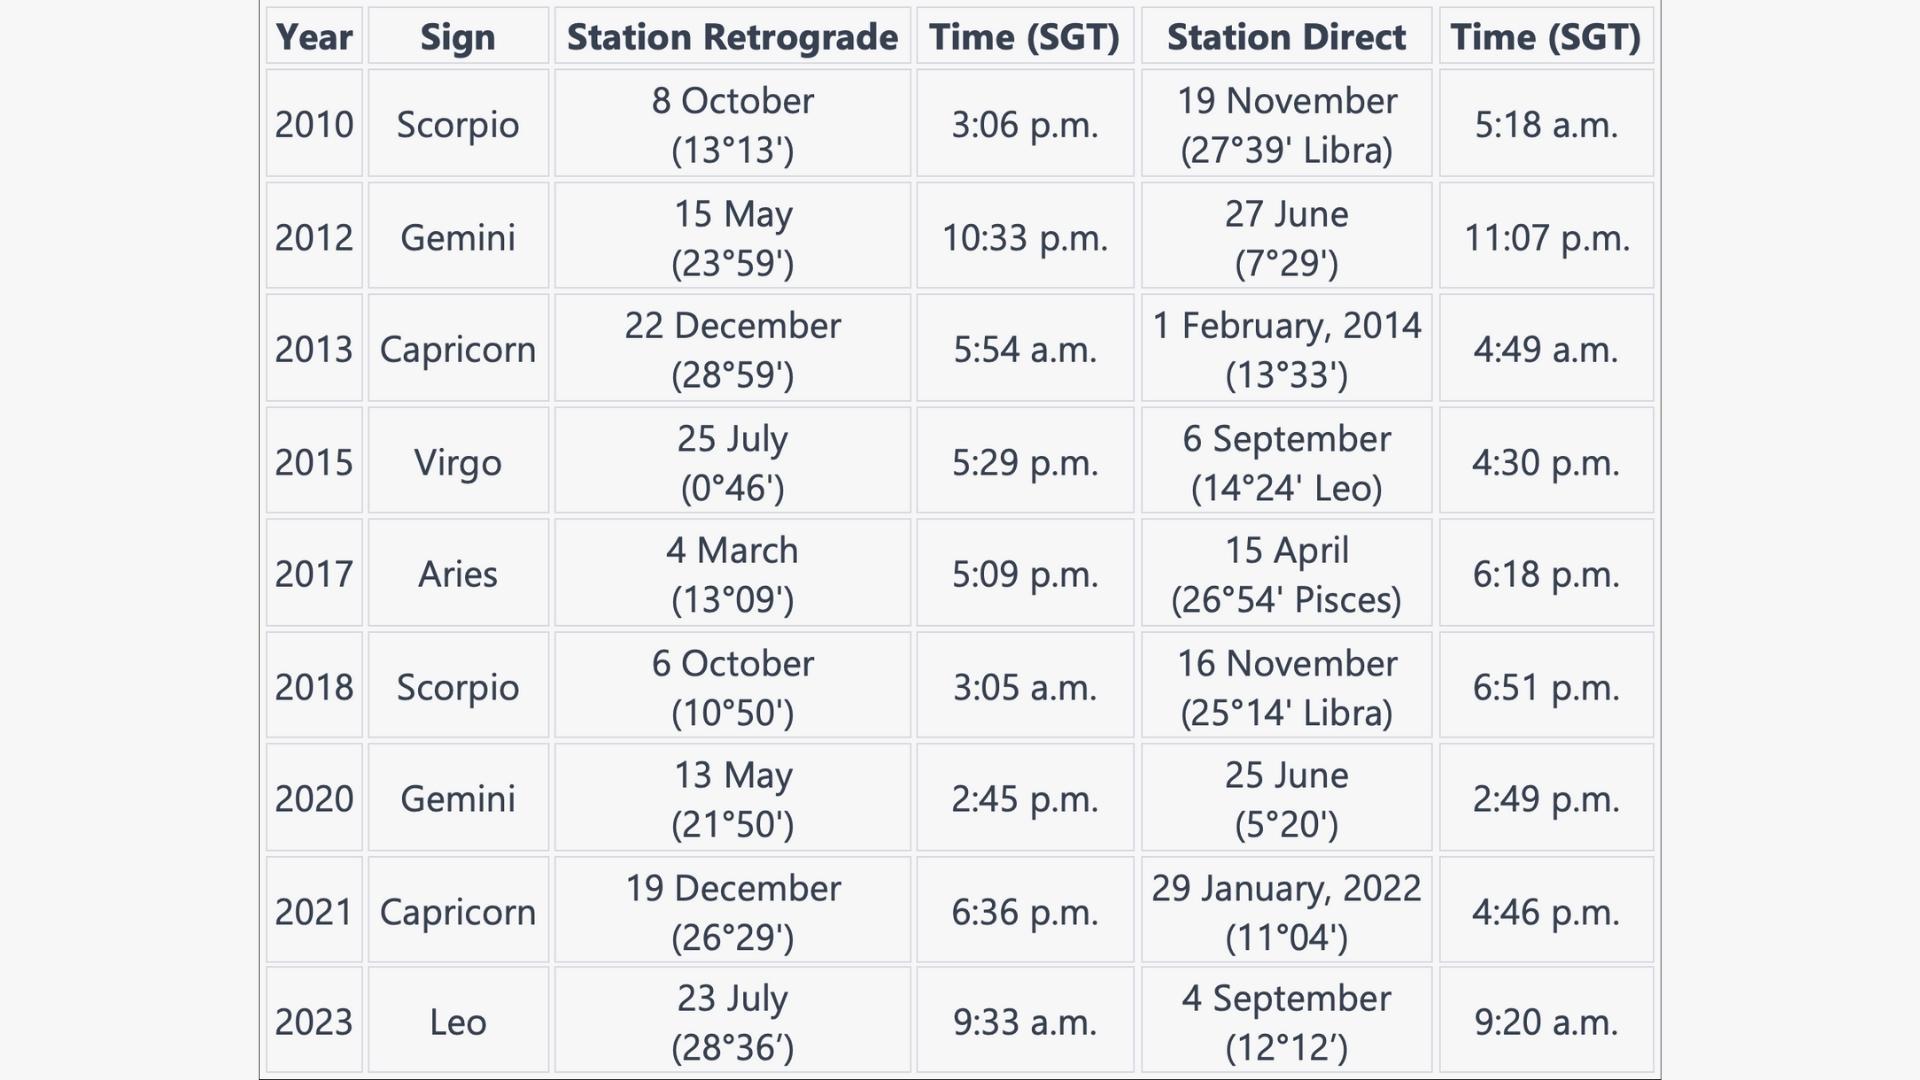 Venus Station Retrograde and Direct For The Past Decade